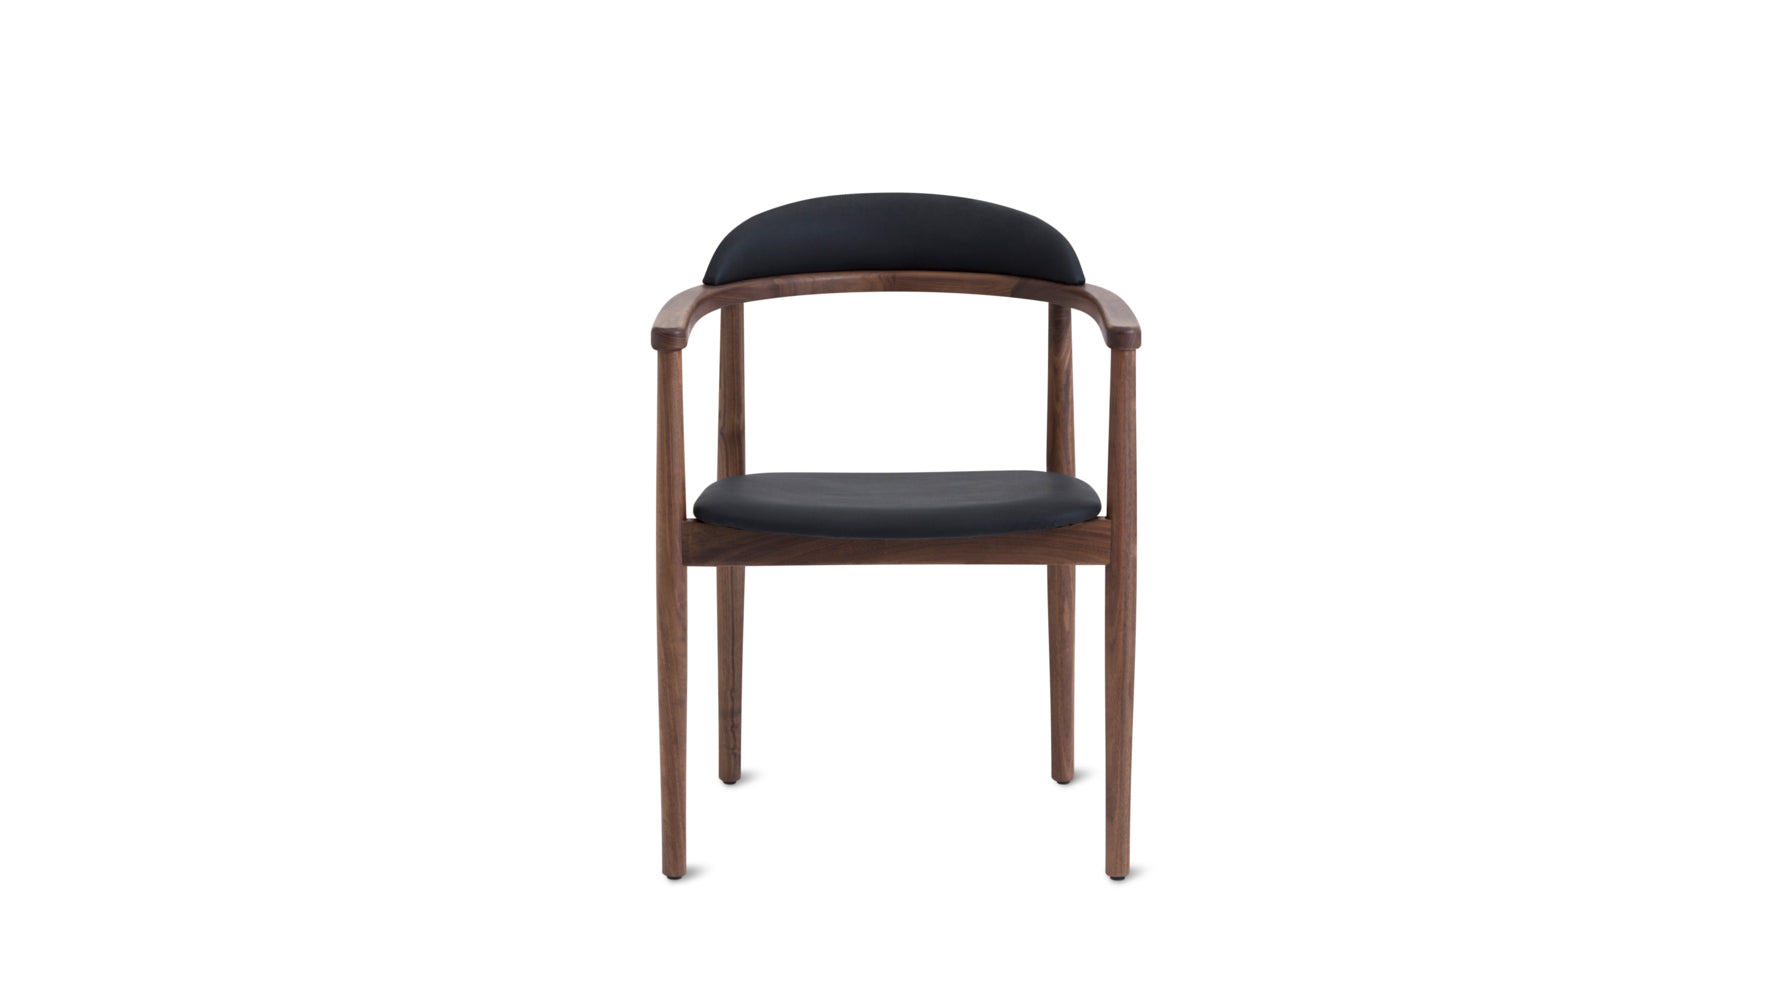 Count On Me Dining Chair, Walnut Black - Image 1